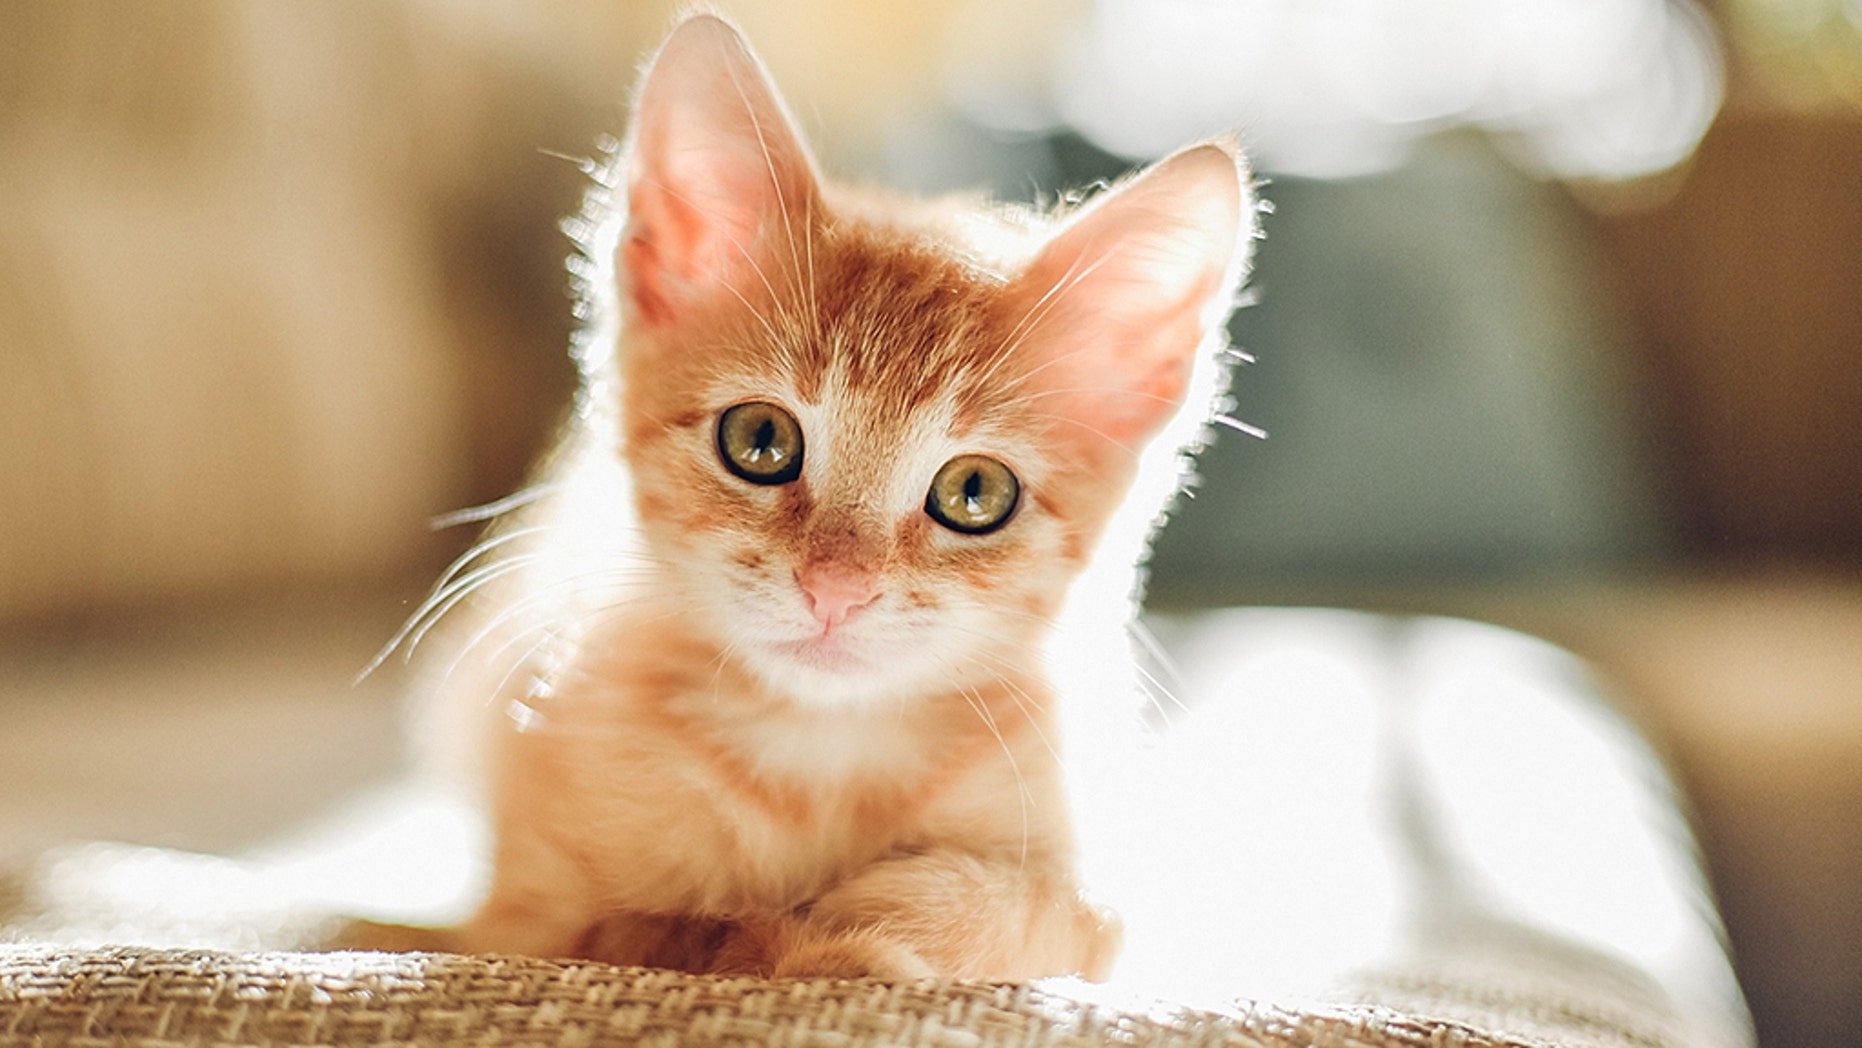 A kitten bite resulted in a medical bill of nearly $ 50,000 for a woman from Florida. (IStock)